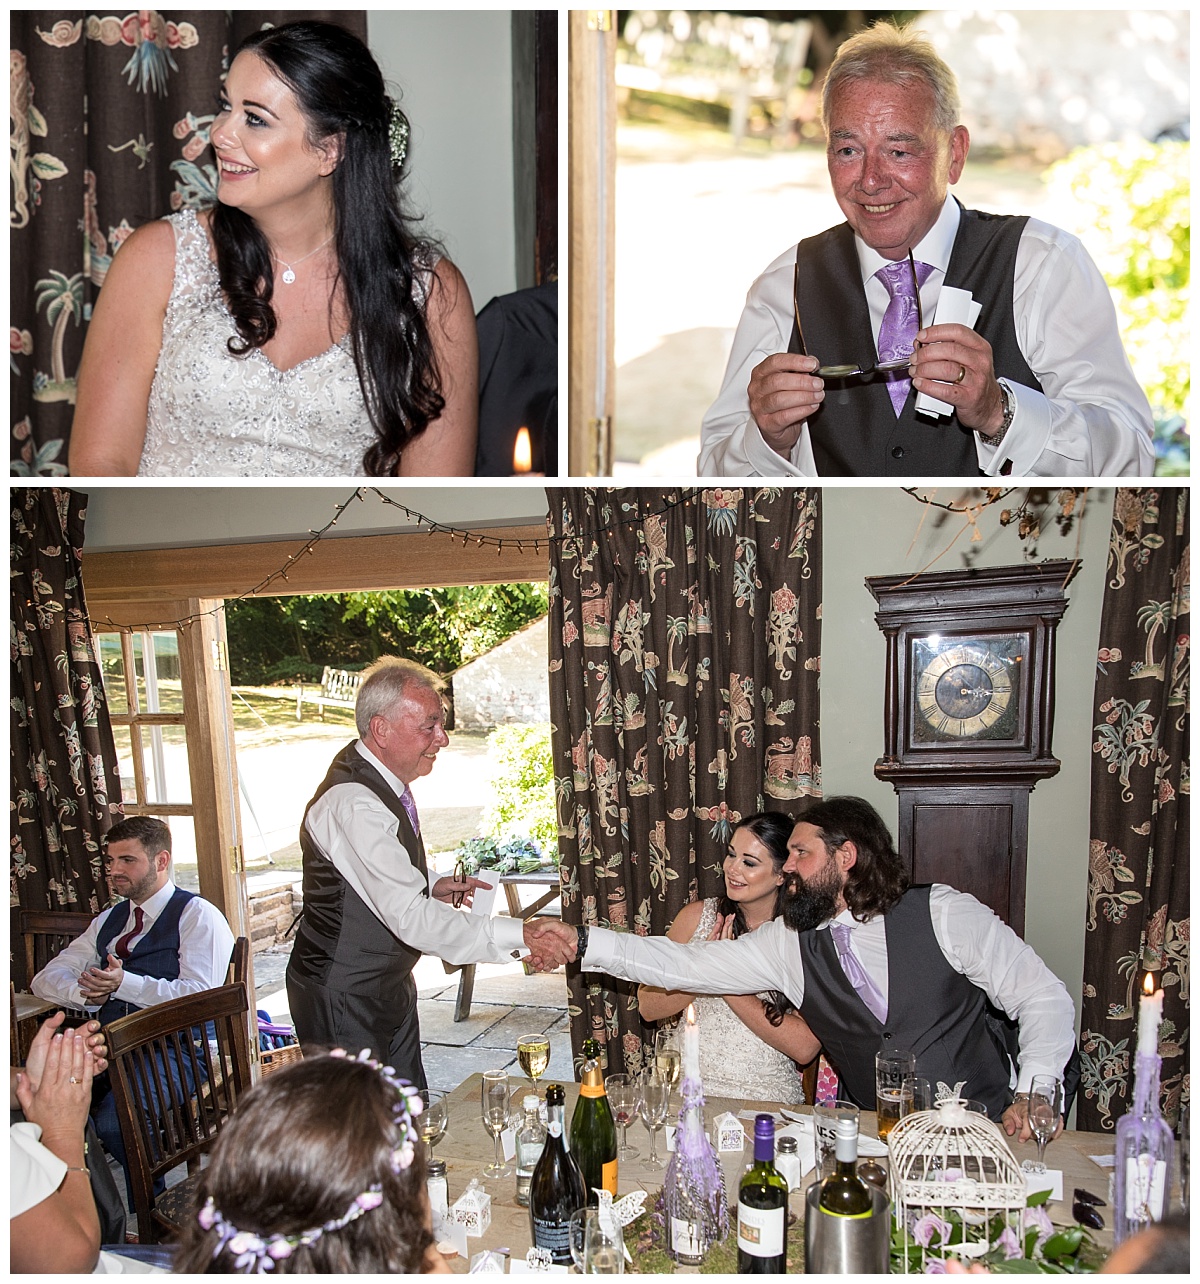 Wedding Photography Manchester - Lauren and Colyn's Wizard Wedding 59